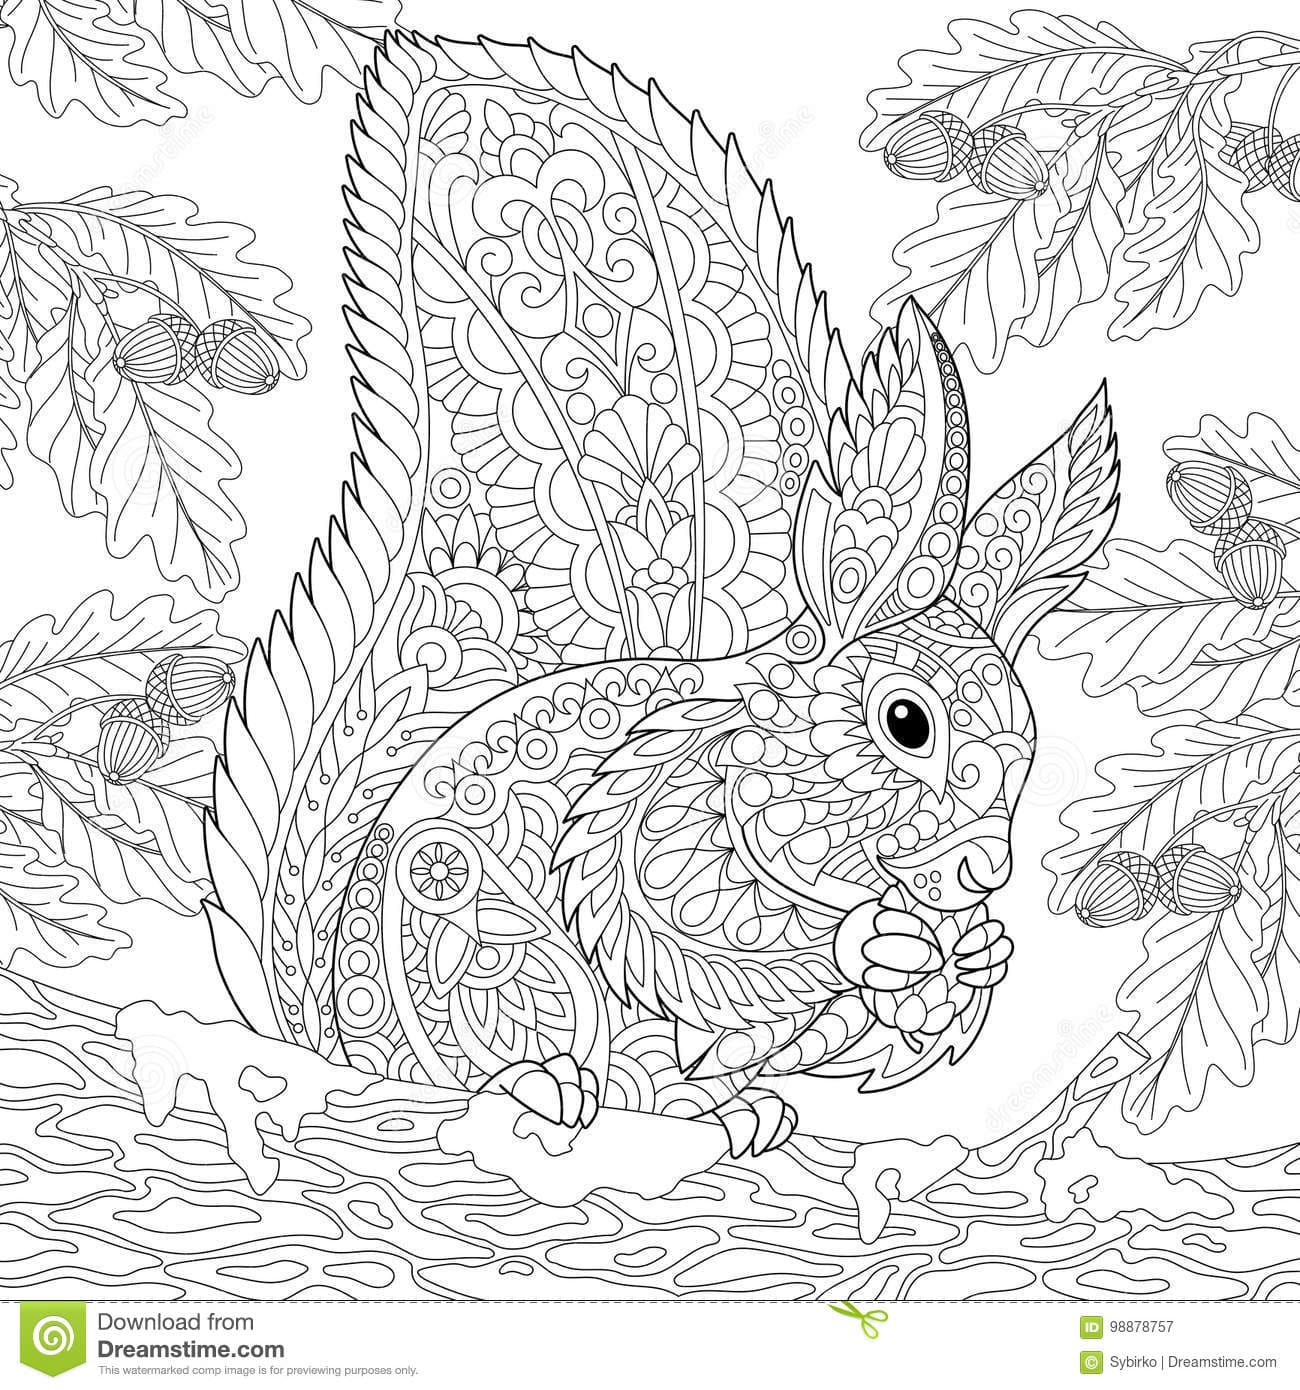 Zentangle Stylized Squirrel Coloring Page